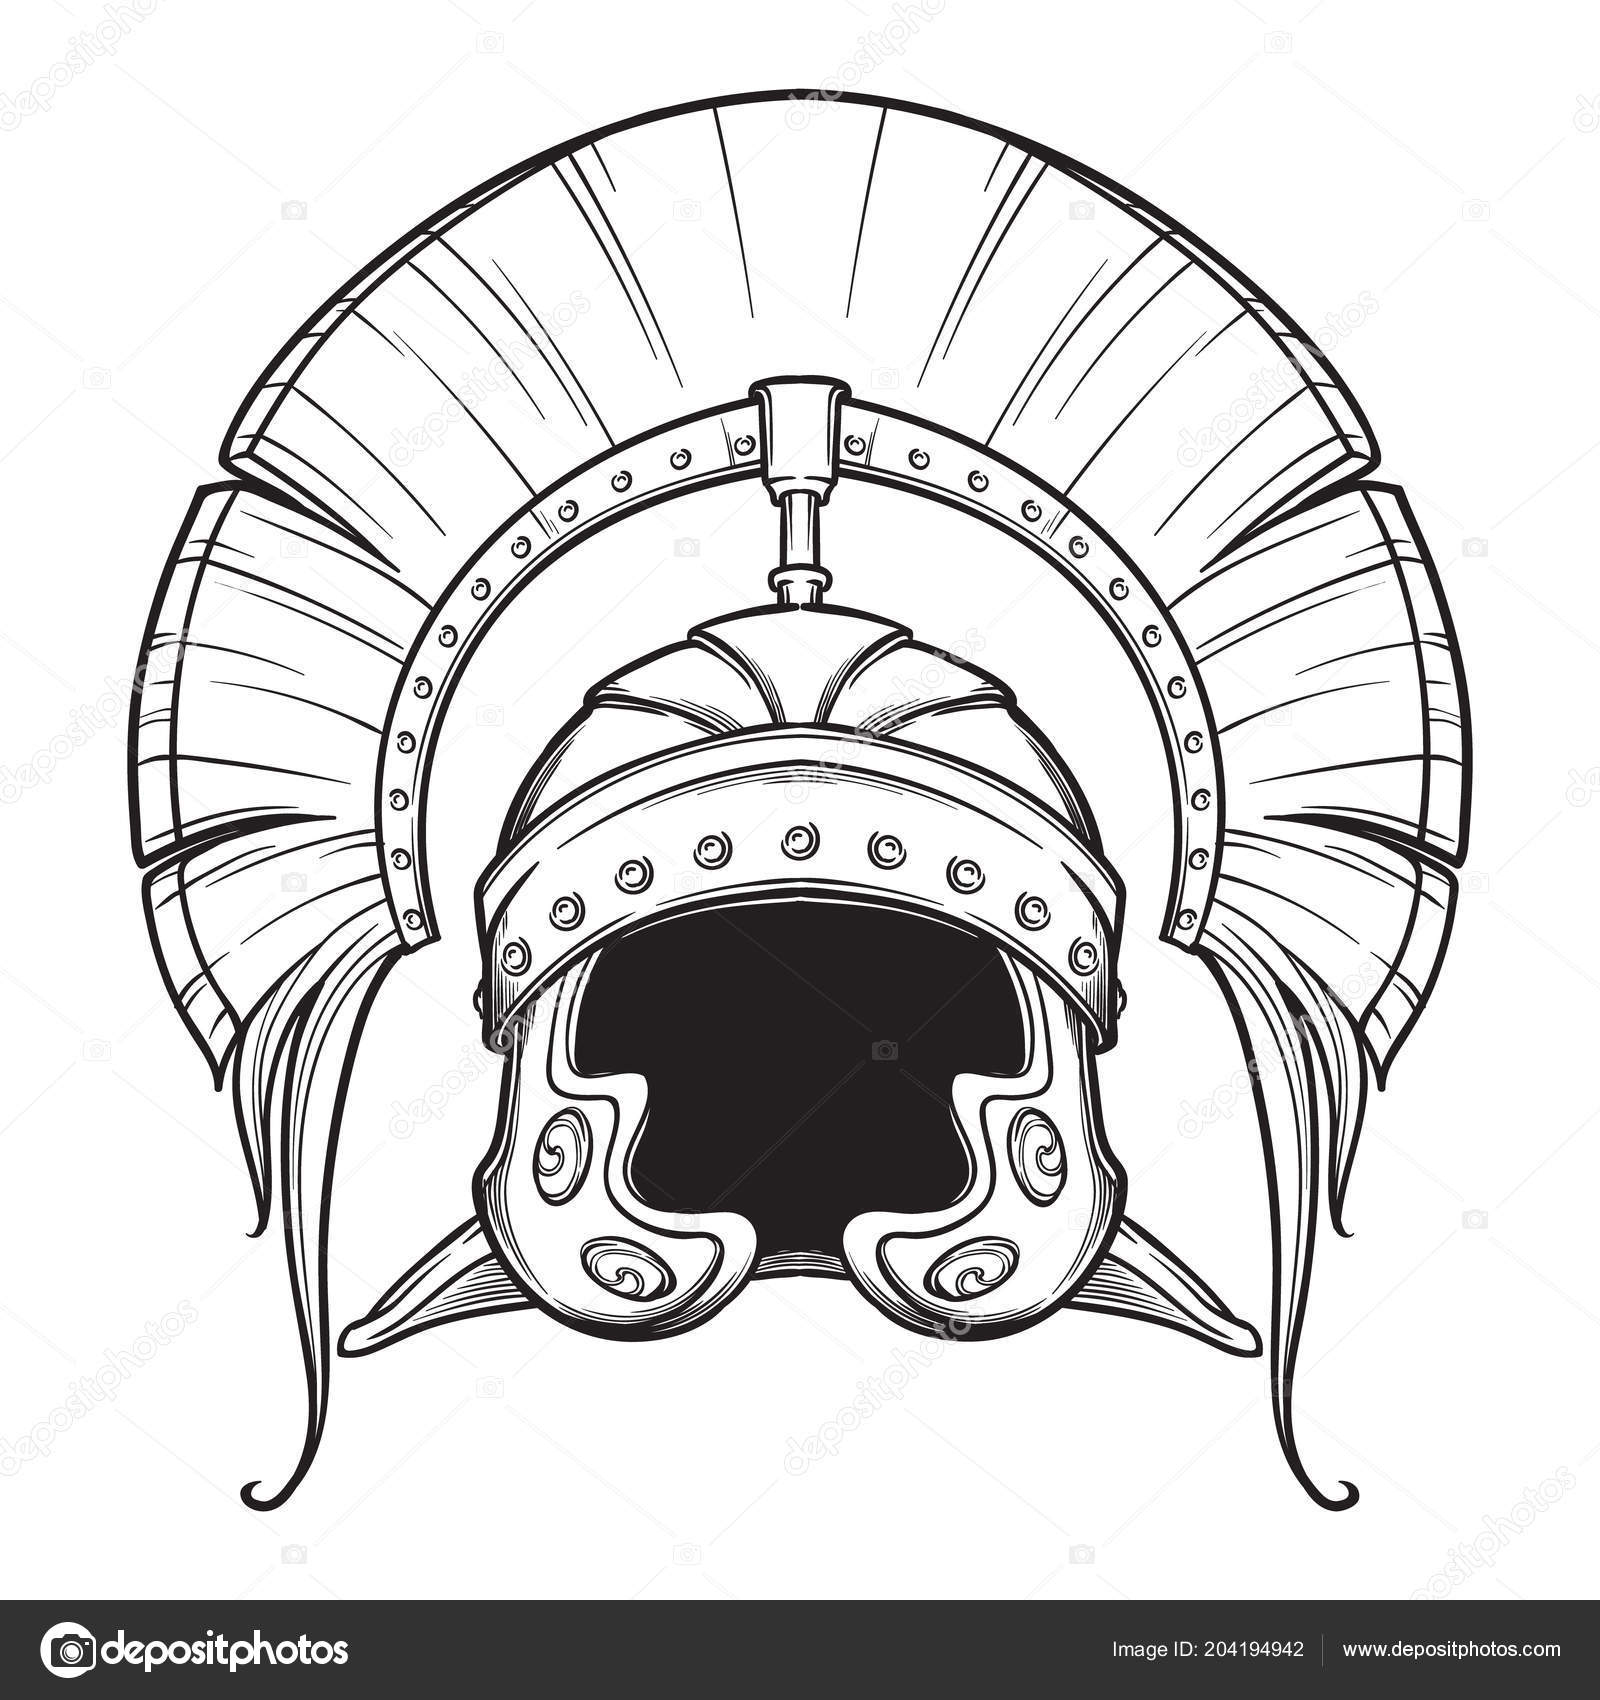 Centurion Helmet Drawing Galea Roman Imperial Helmet With Crest Tipically Worn By Centurion Front View Heraldry Element Black A Nd White Drawing Isolated On White Background Stock Vector C Aen Seidhe 204194942